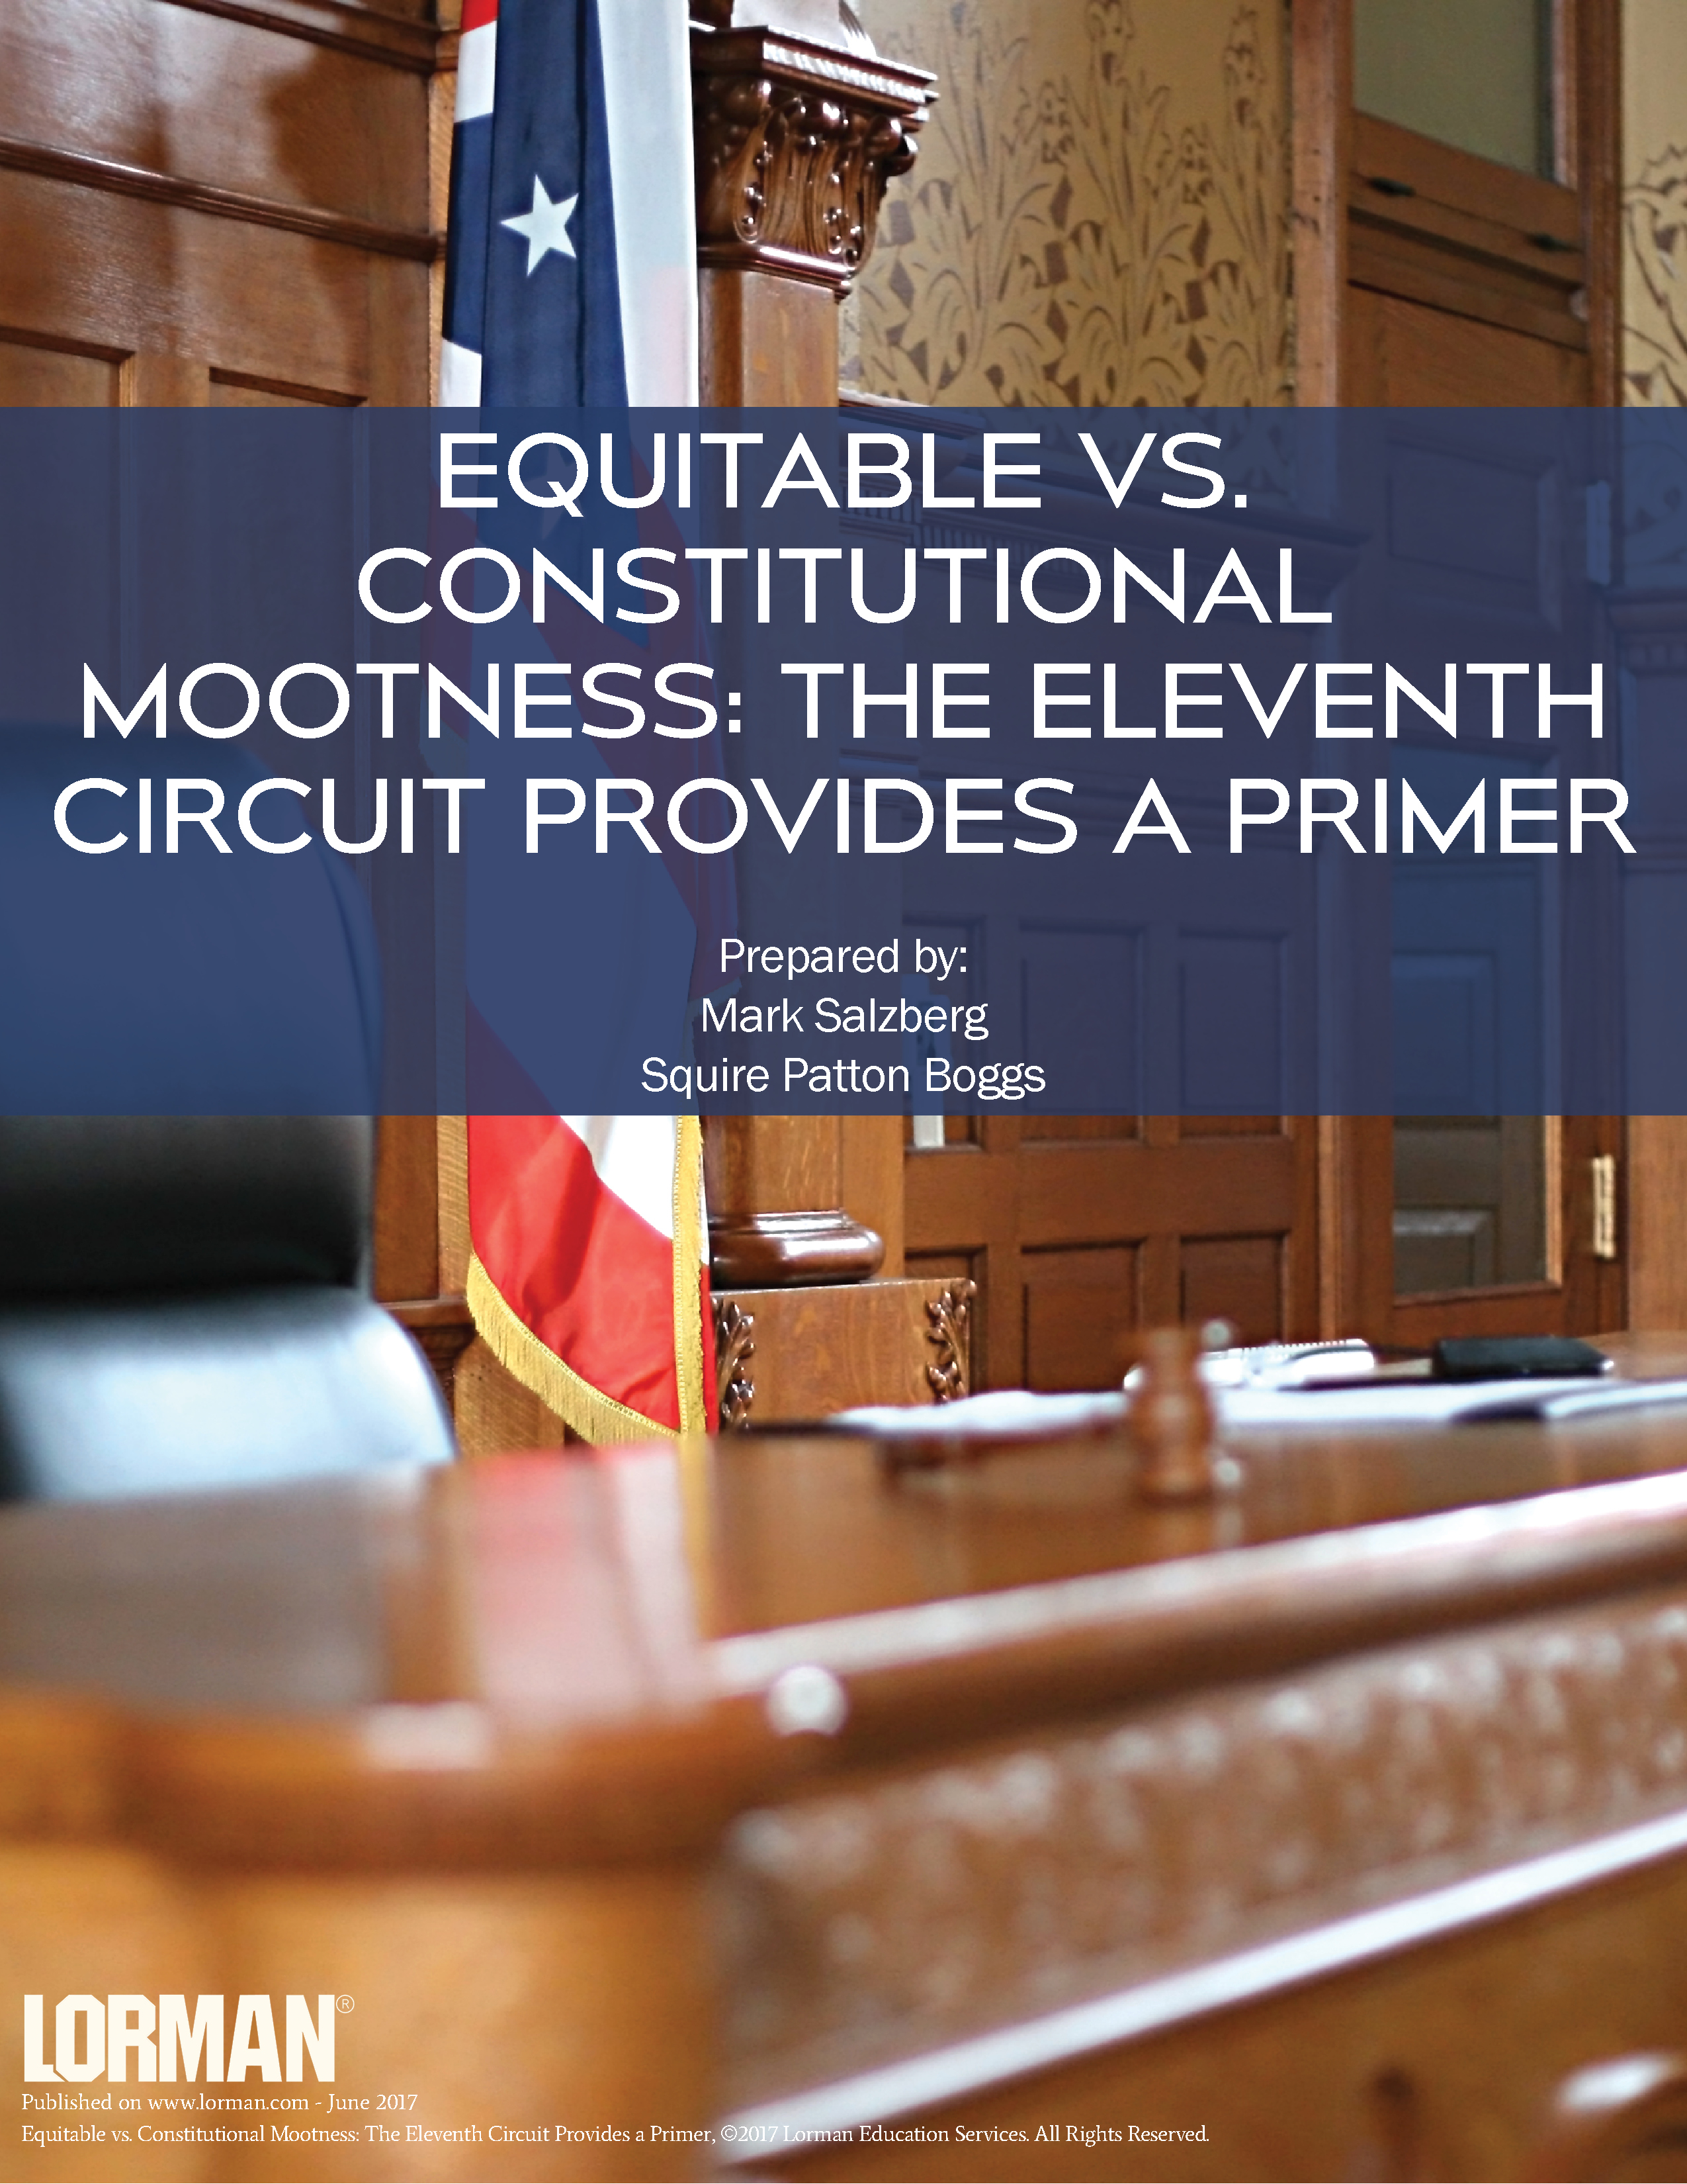 Equitable vs. Constitutional Mootness: The Eleventh Circuit Provides a Primer